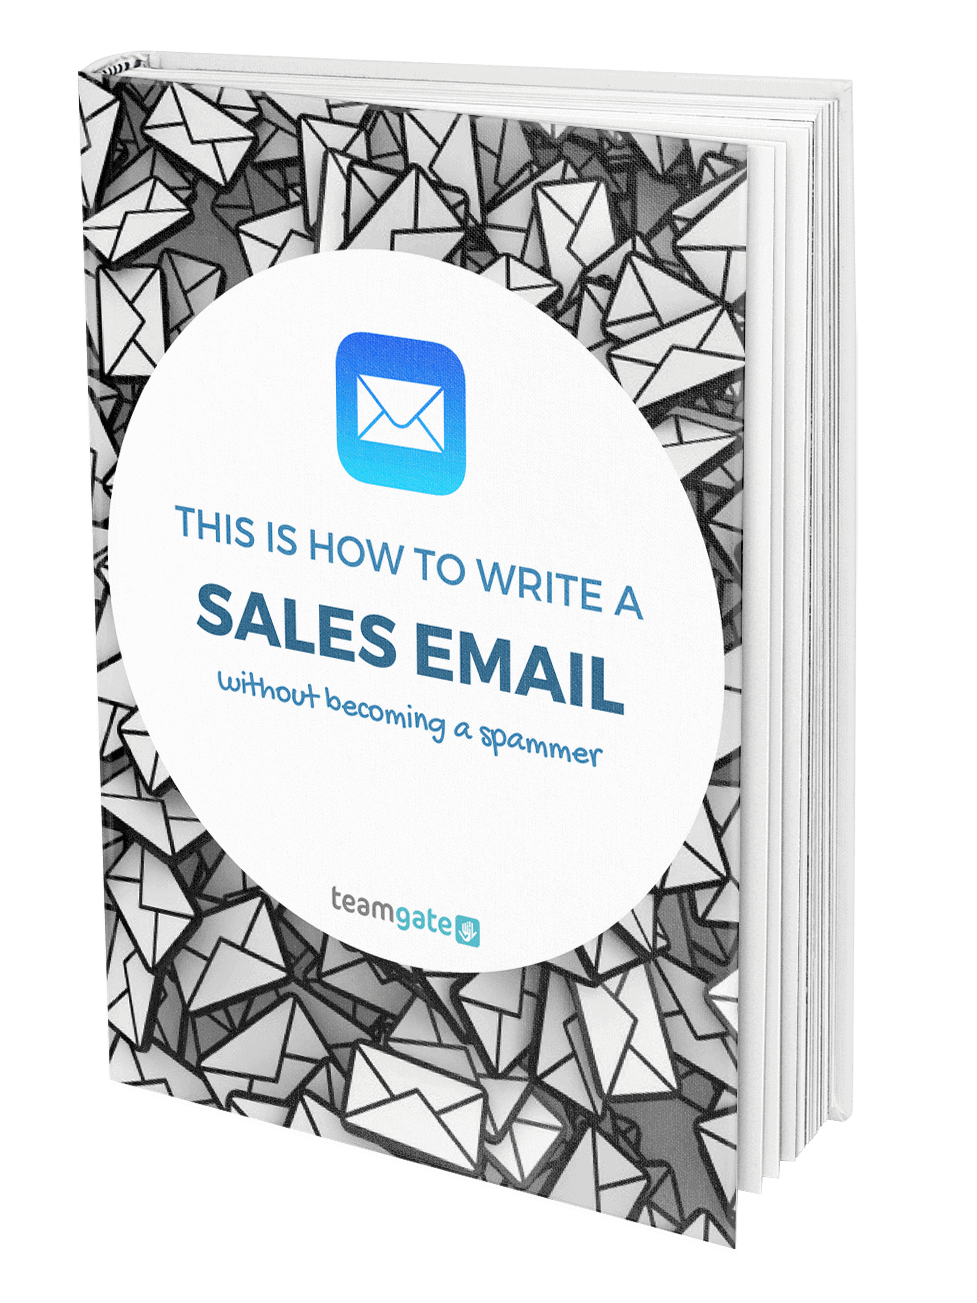 eBook-and-Guide-How-To-Write-a-Sales-Email-by-Teamgate